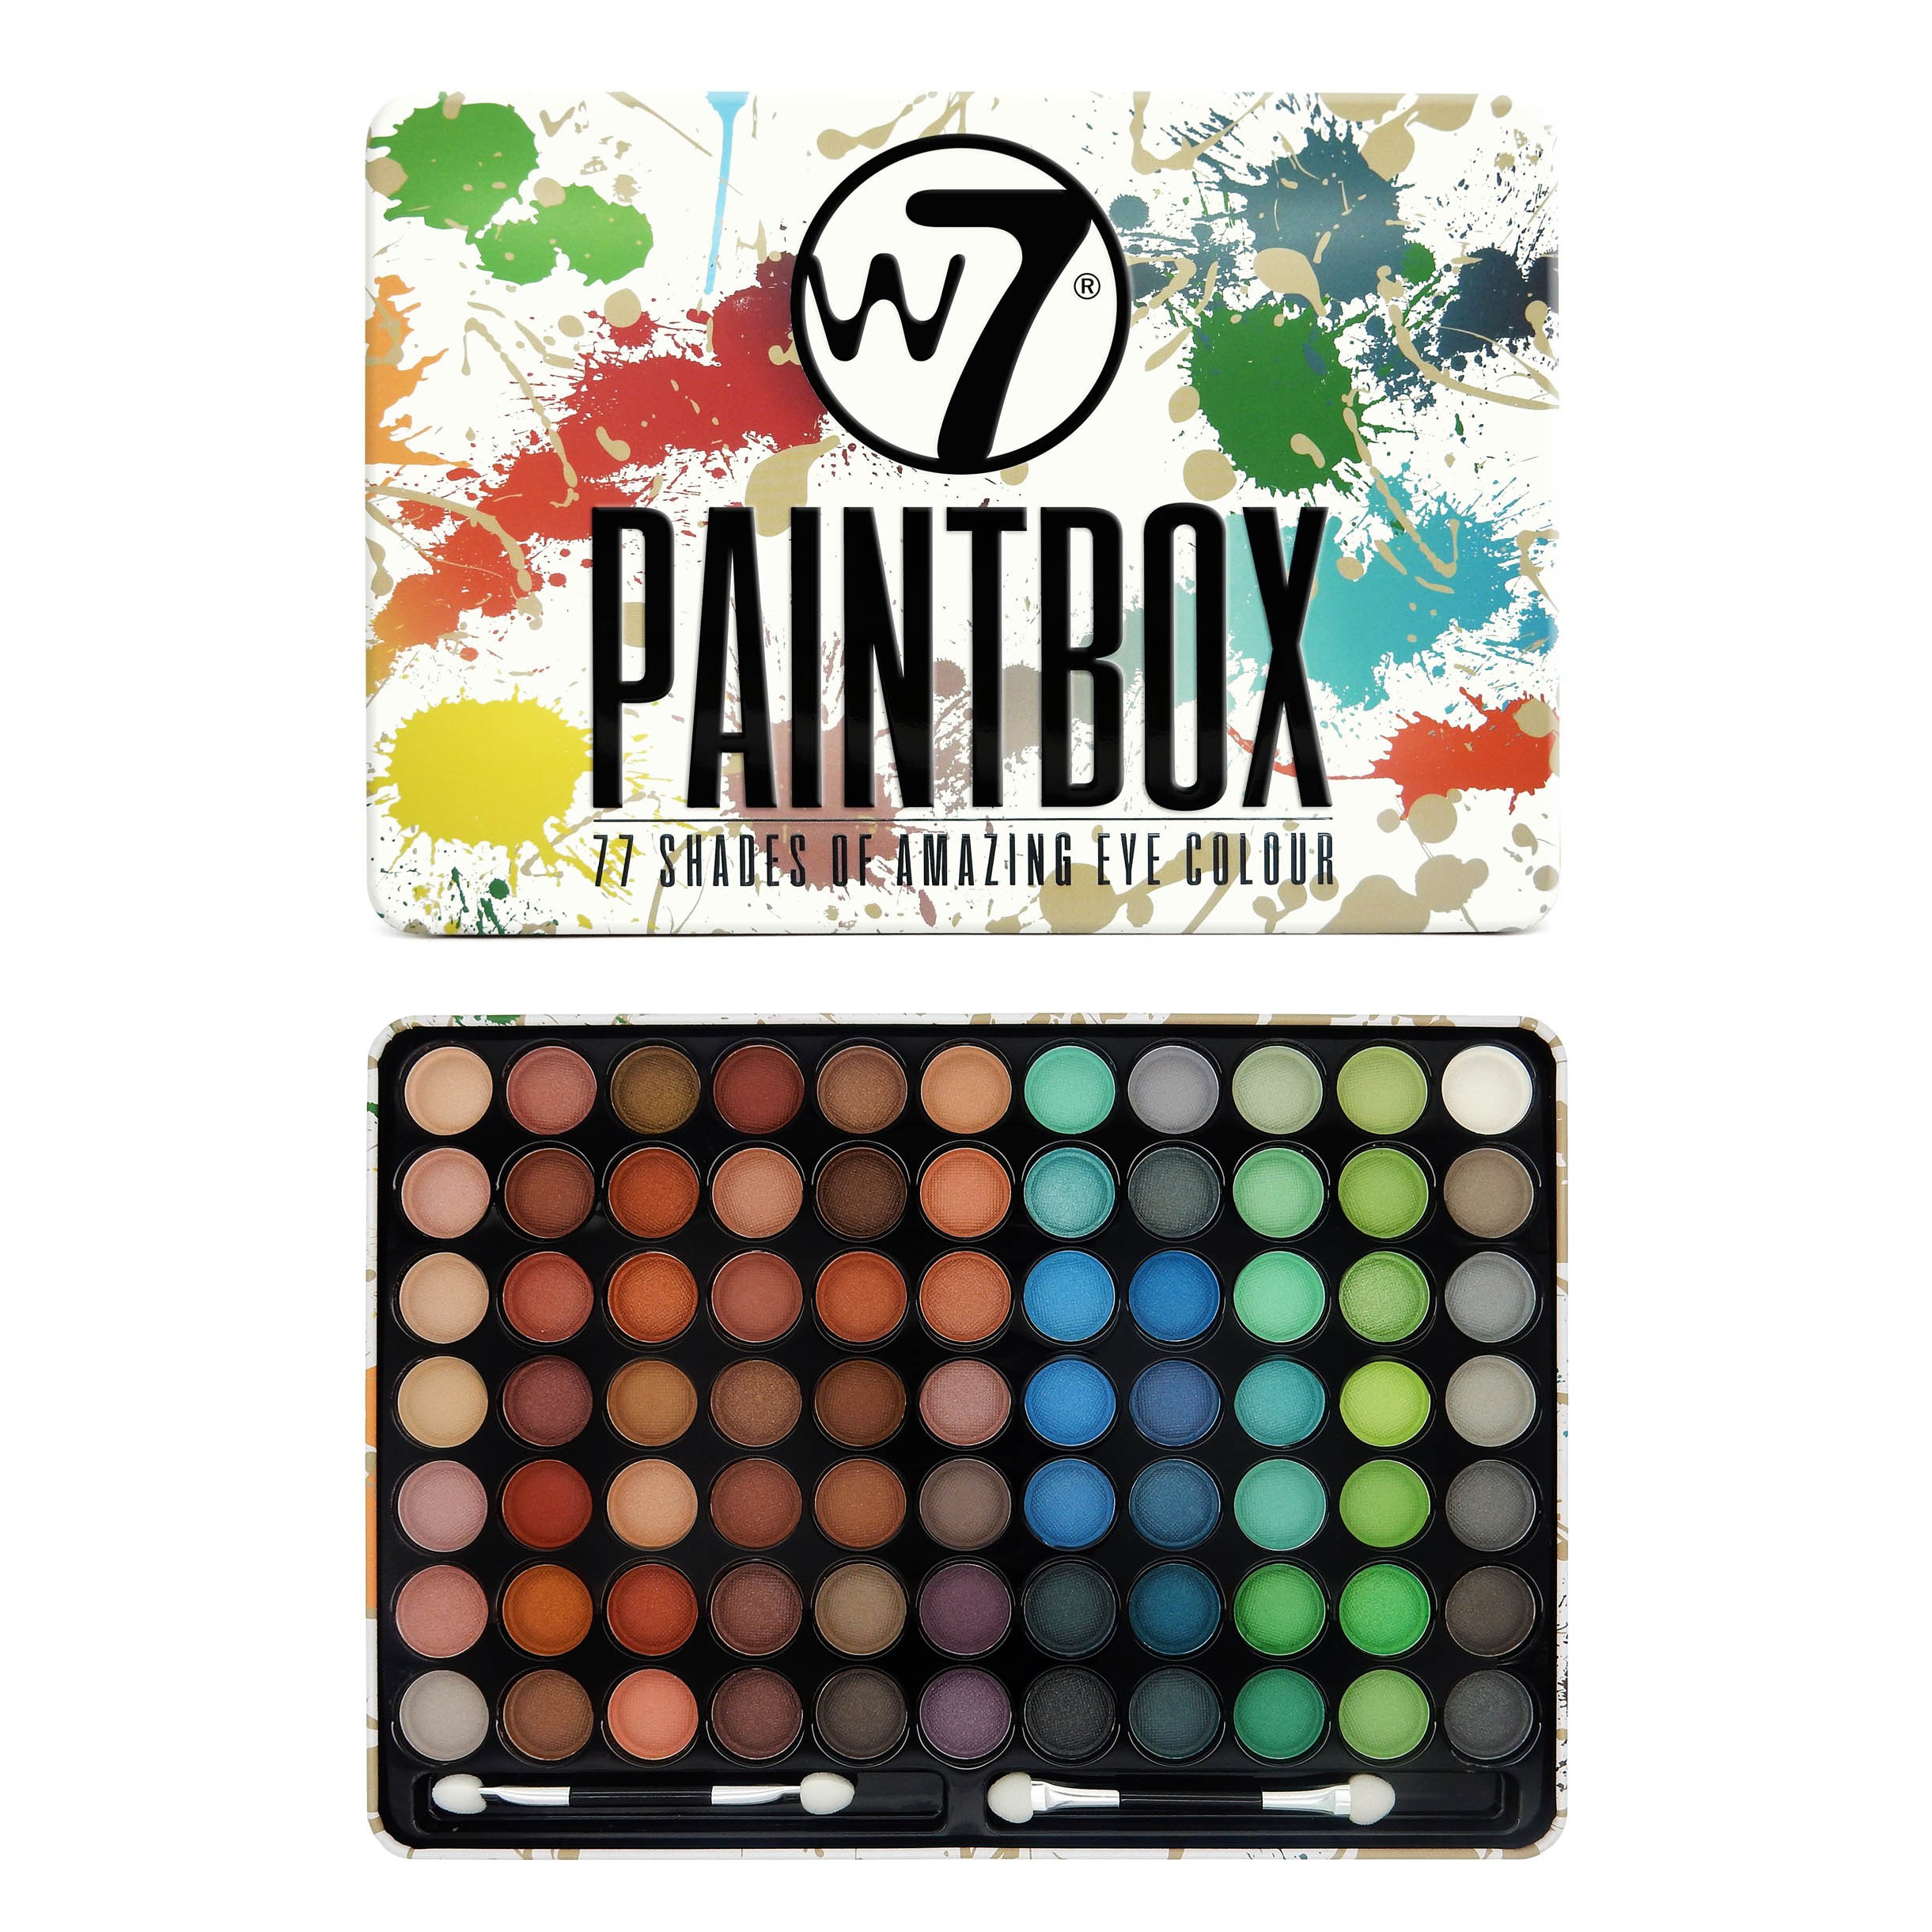 Lidschatten-Palette - Paintbox - 77 Shades Of Amazing Eye Colours